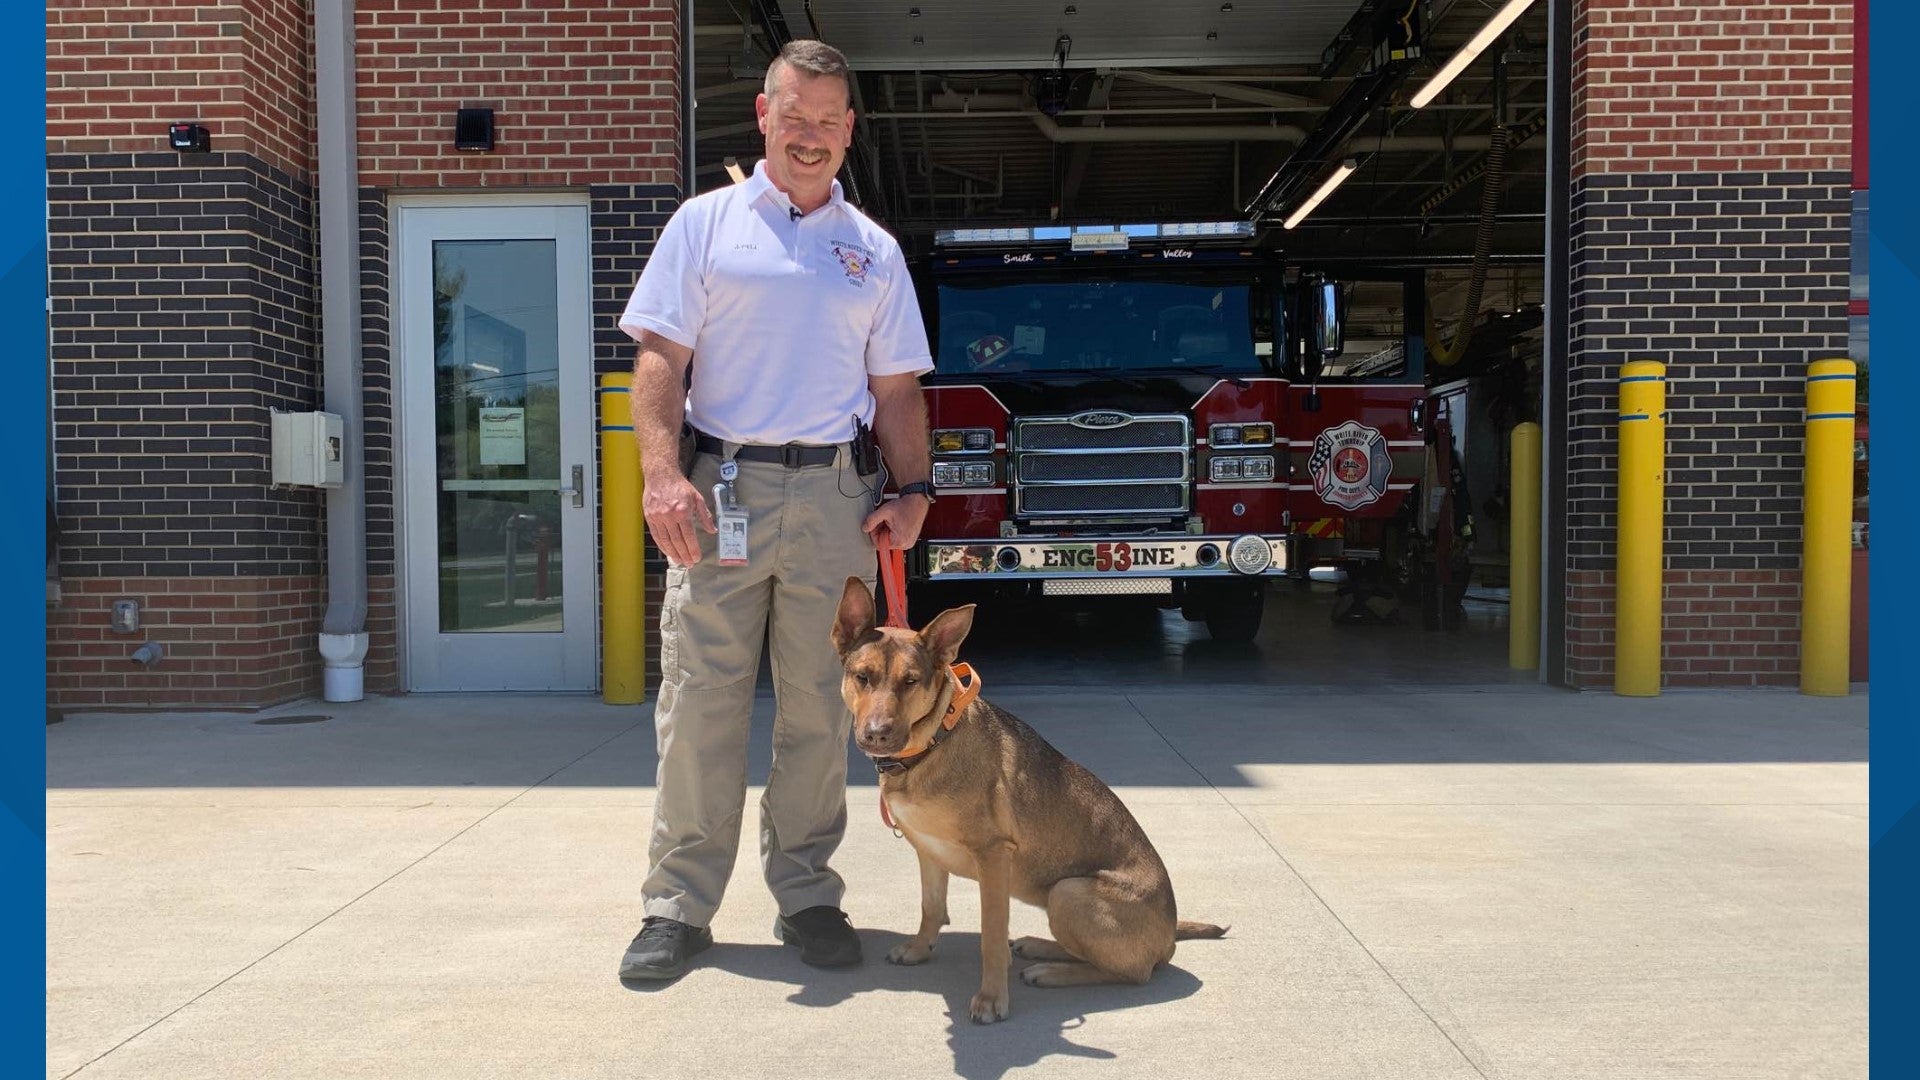 Rosie the rescued rescue dog had 'great makings for the job' in Johnson County